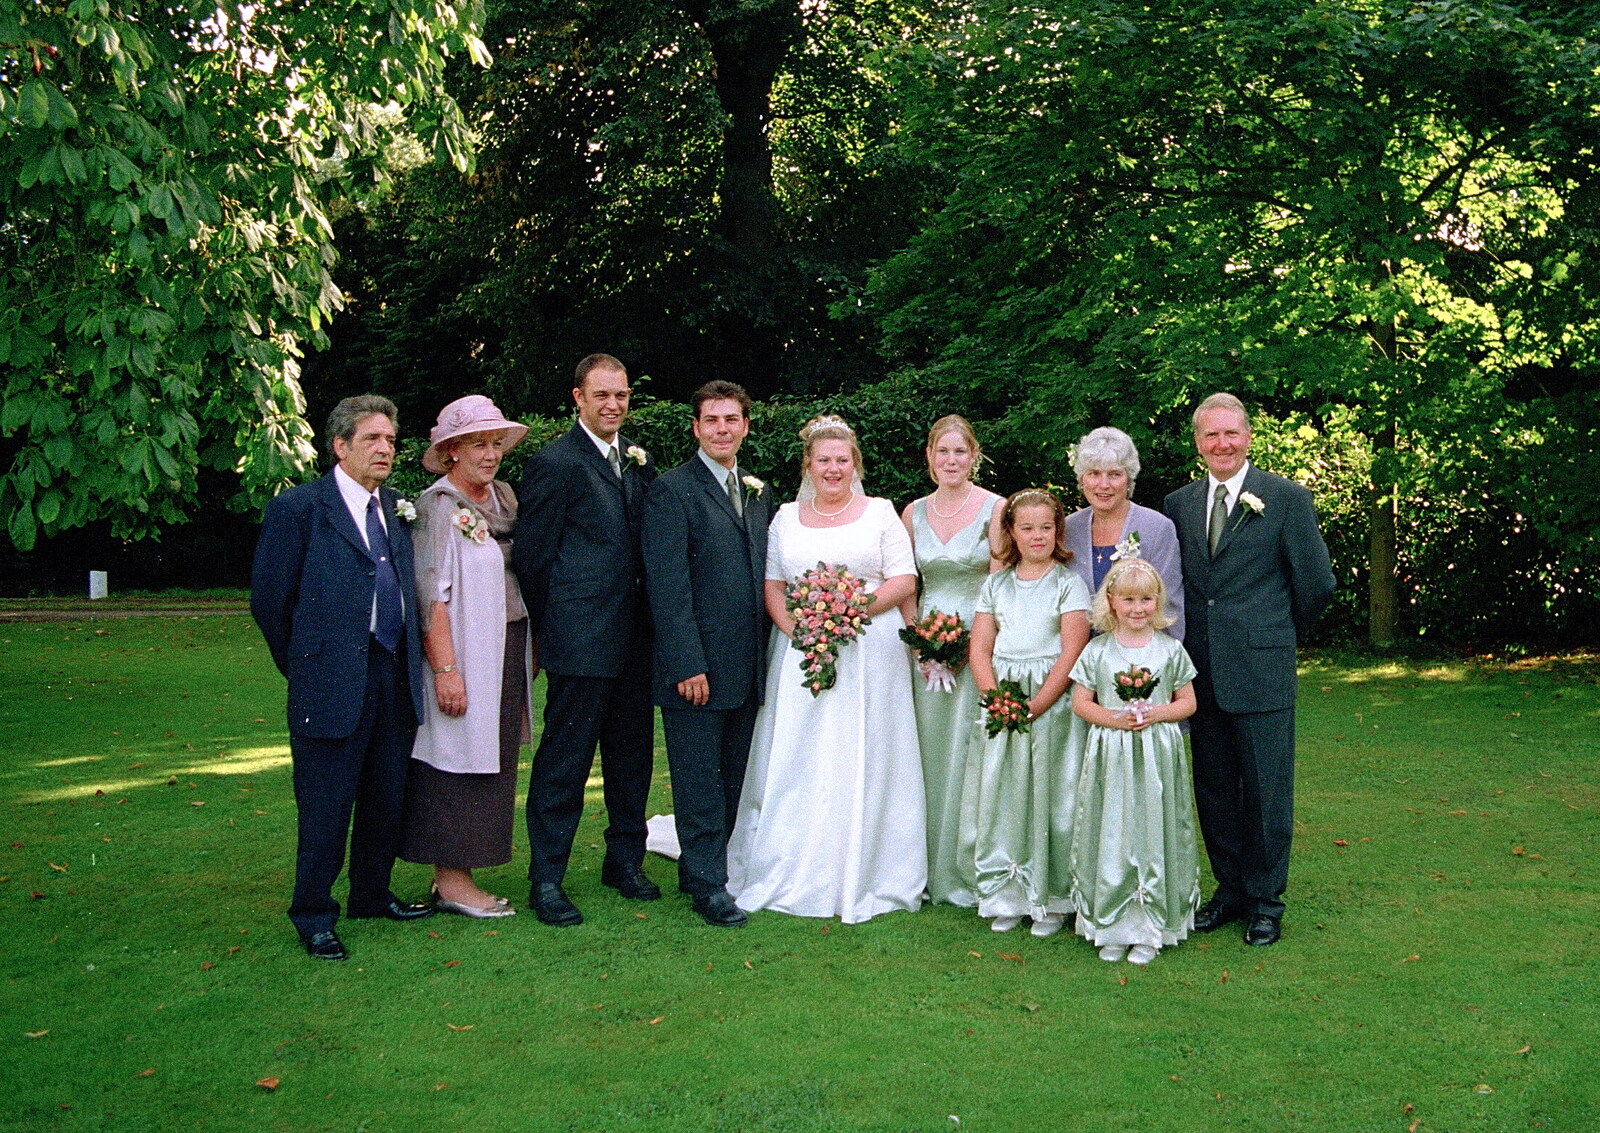 Family group photo from Helen and Neil's Wedding, The Oaksmere, Brome, Suffolk - 4th August 2000